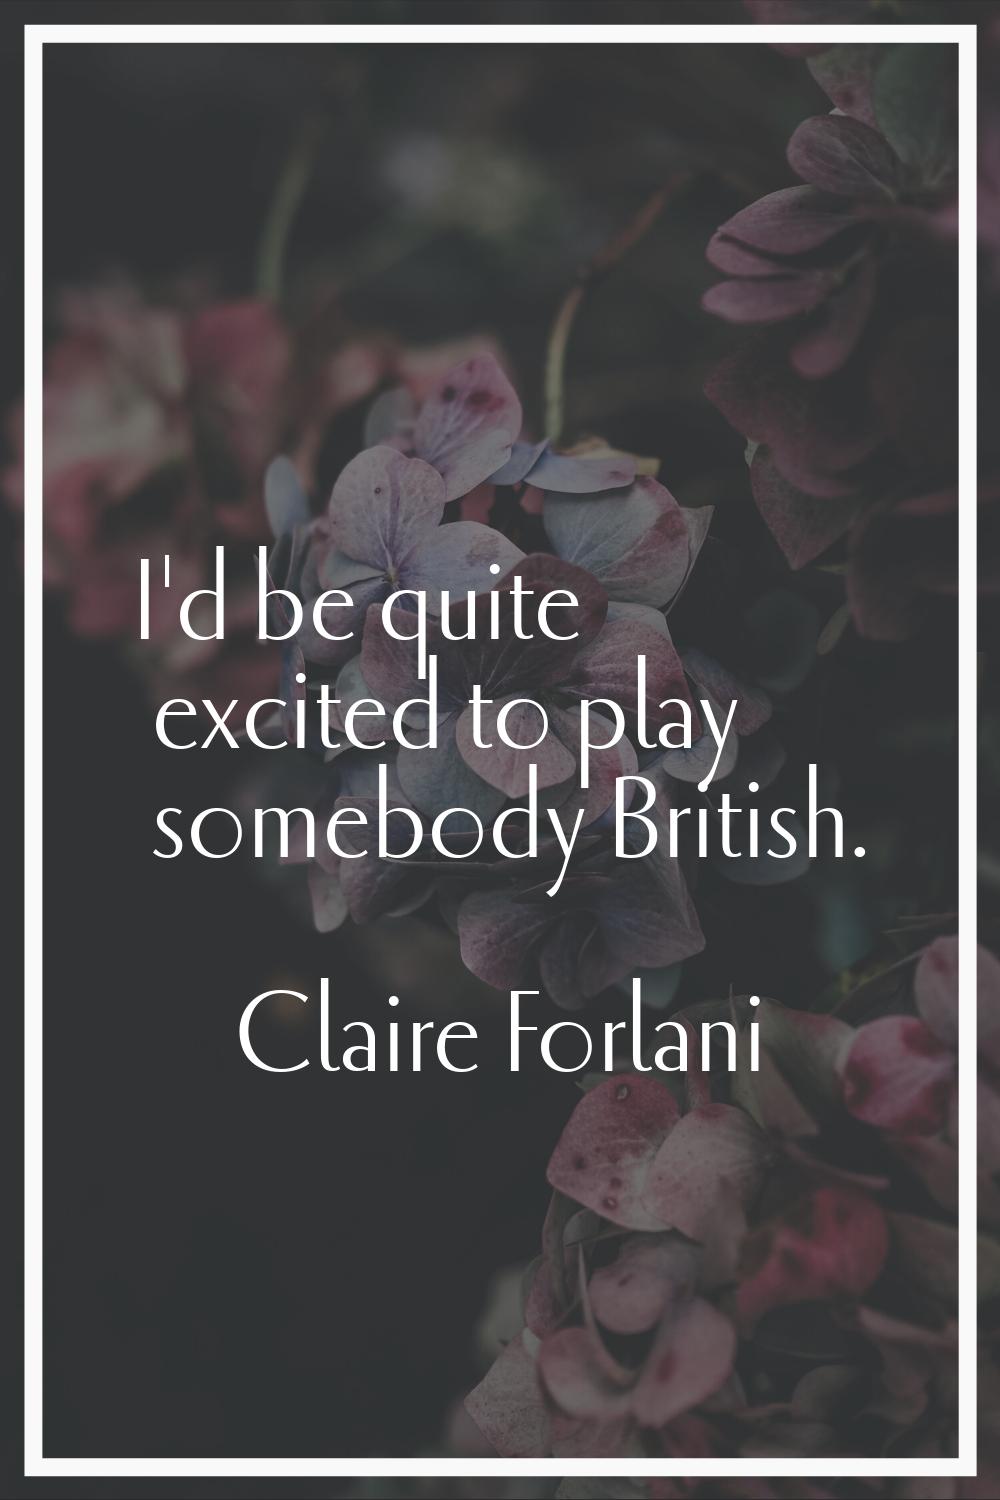 I'd be quite excited to play somebody British.